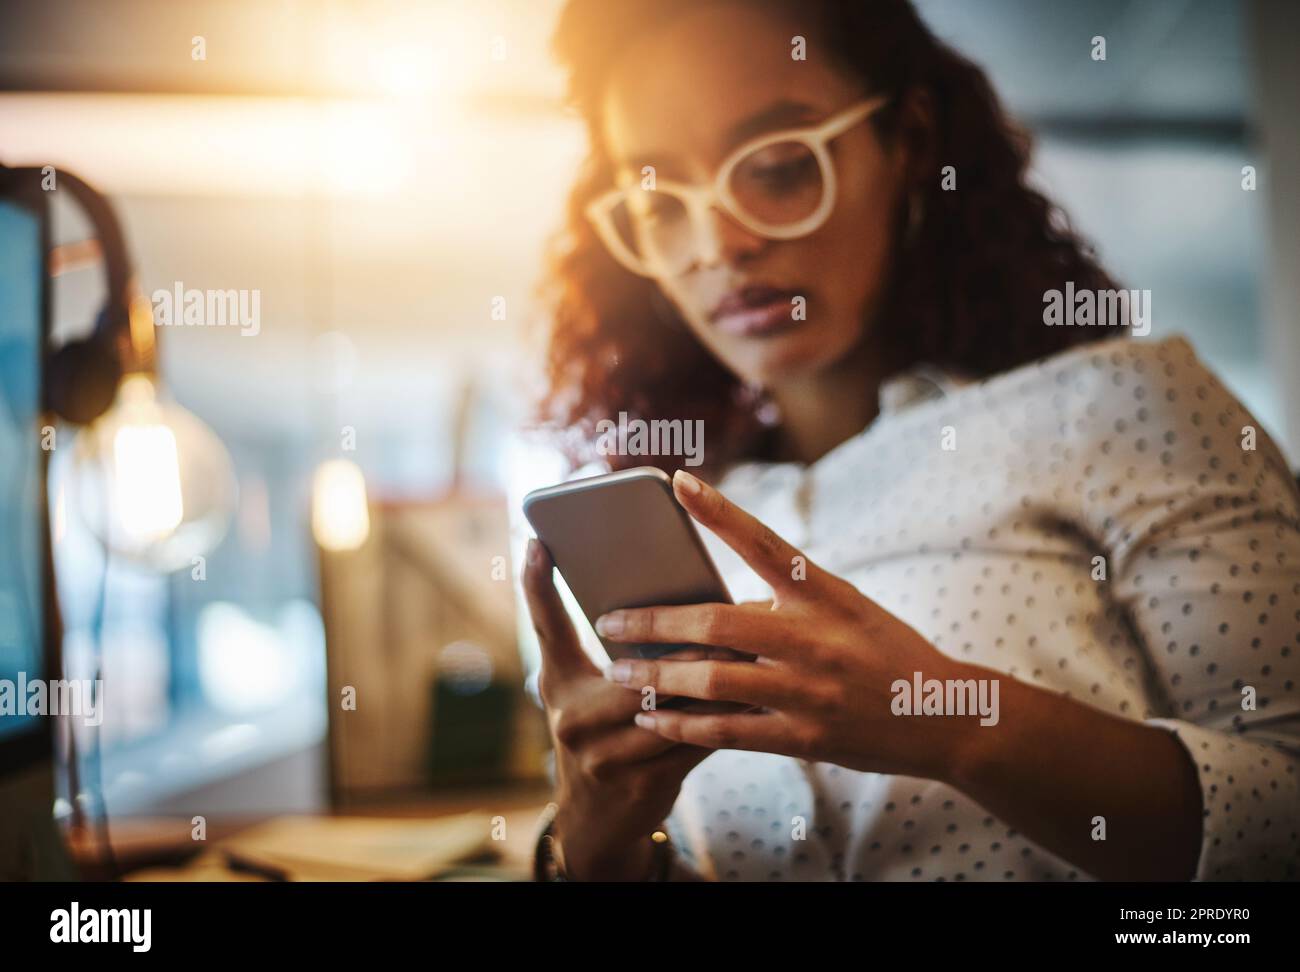 Staying late tonight, dont wait up. a young businesswoman using a mobile phone during a late night at work. Stock Photo